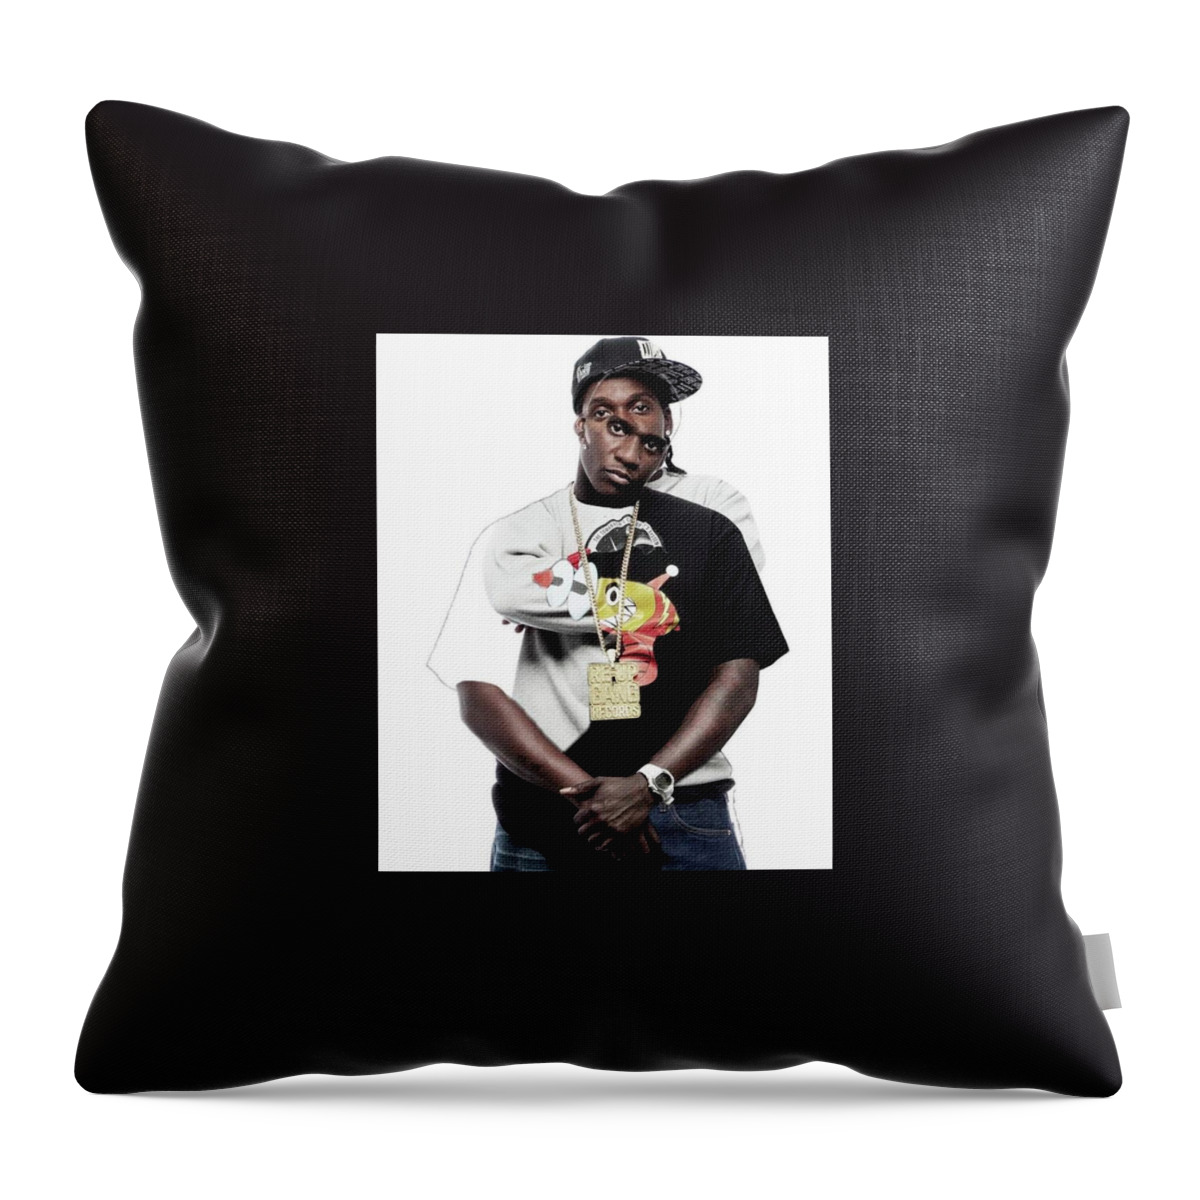 Hiphop Throw Pillow featuring the digital art Lord Willin by Corey Wynn